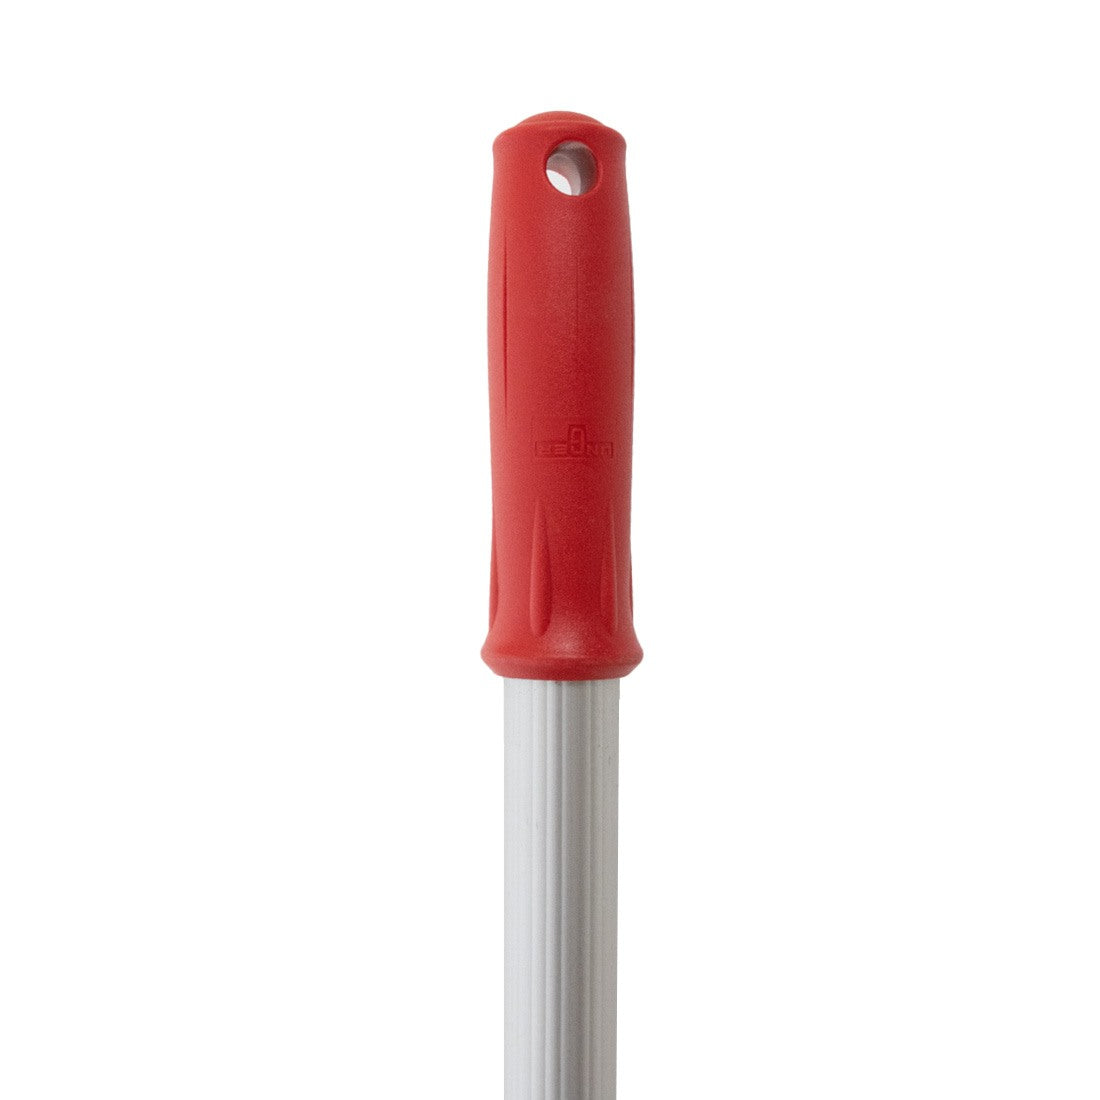 Unger OptiLoc Extension Pole Red 2 Section - 8 Foot - Bottom Section Close-Up